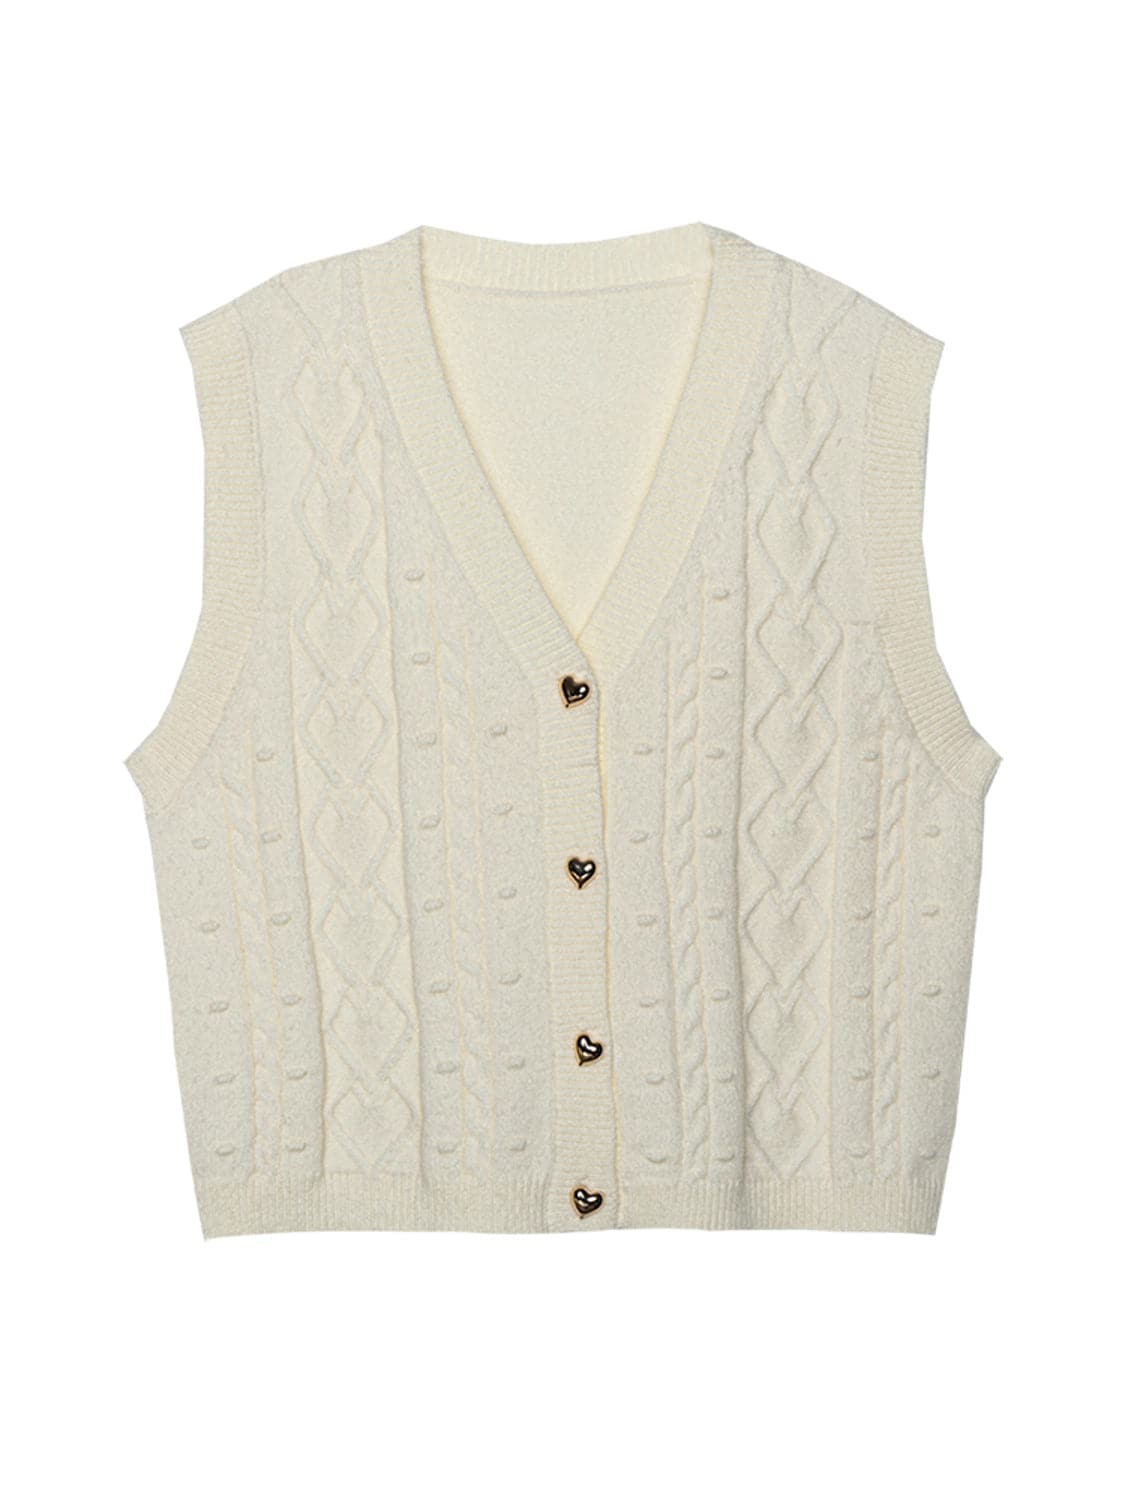 Vest Sweater Knit Cable Chic